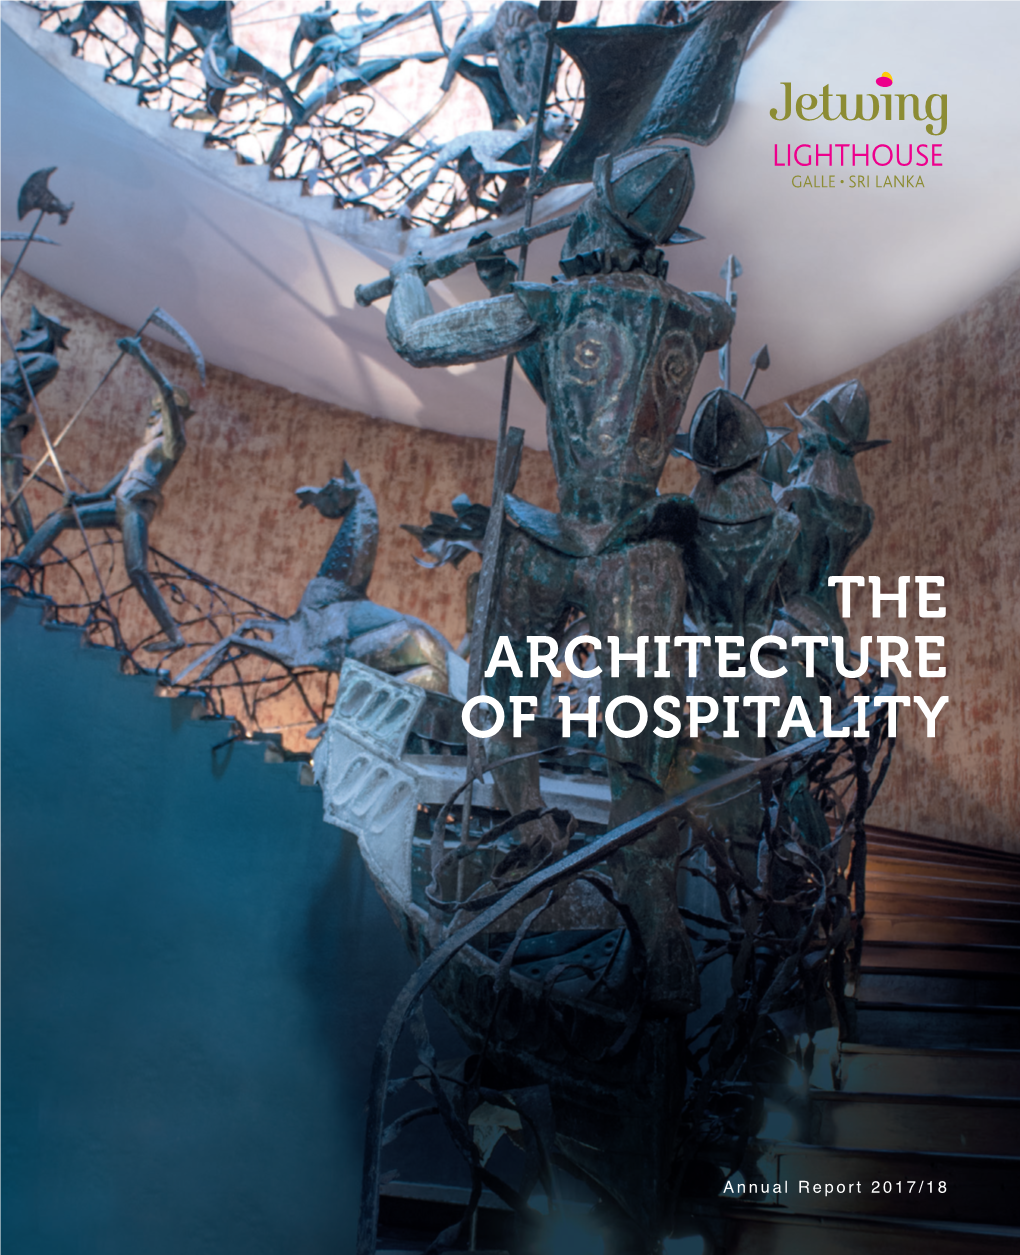 The Architecture of Hospitality